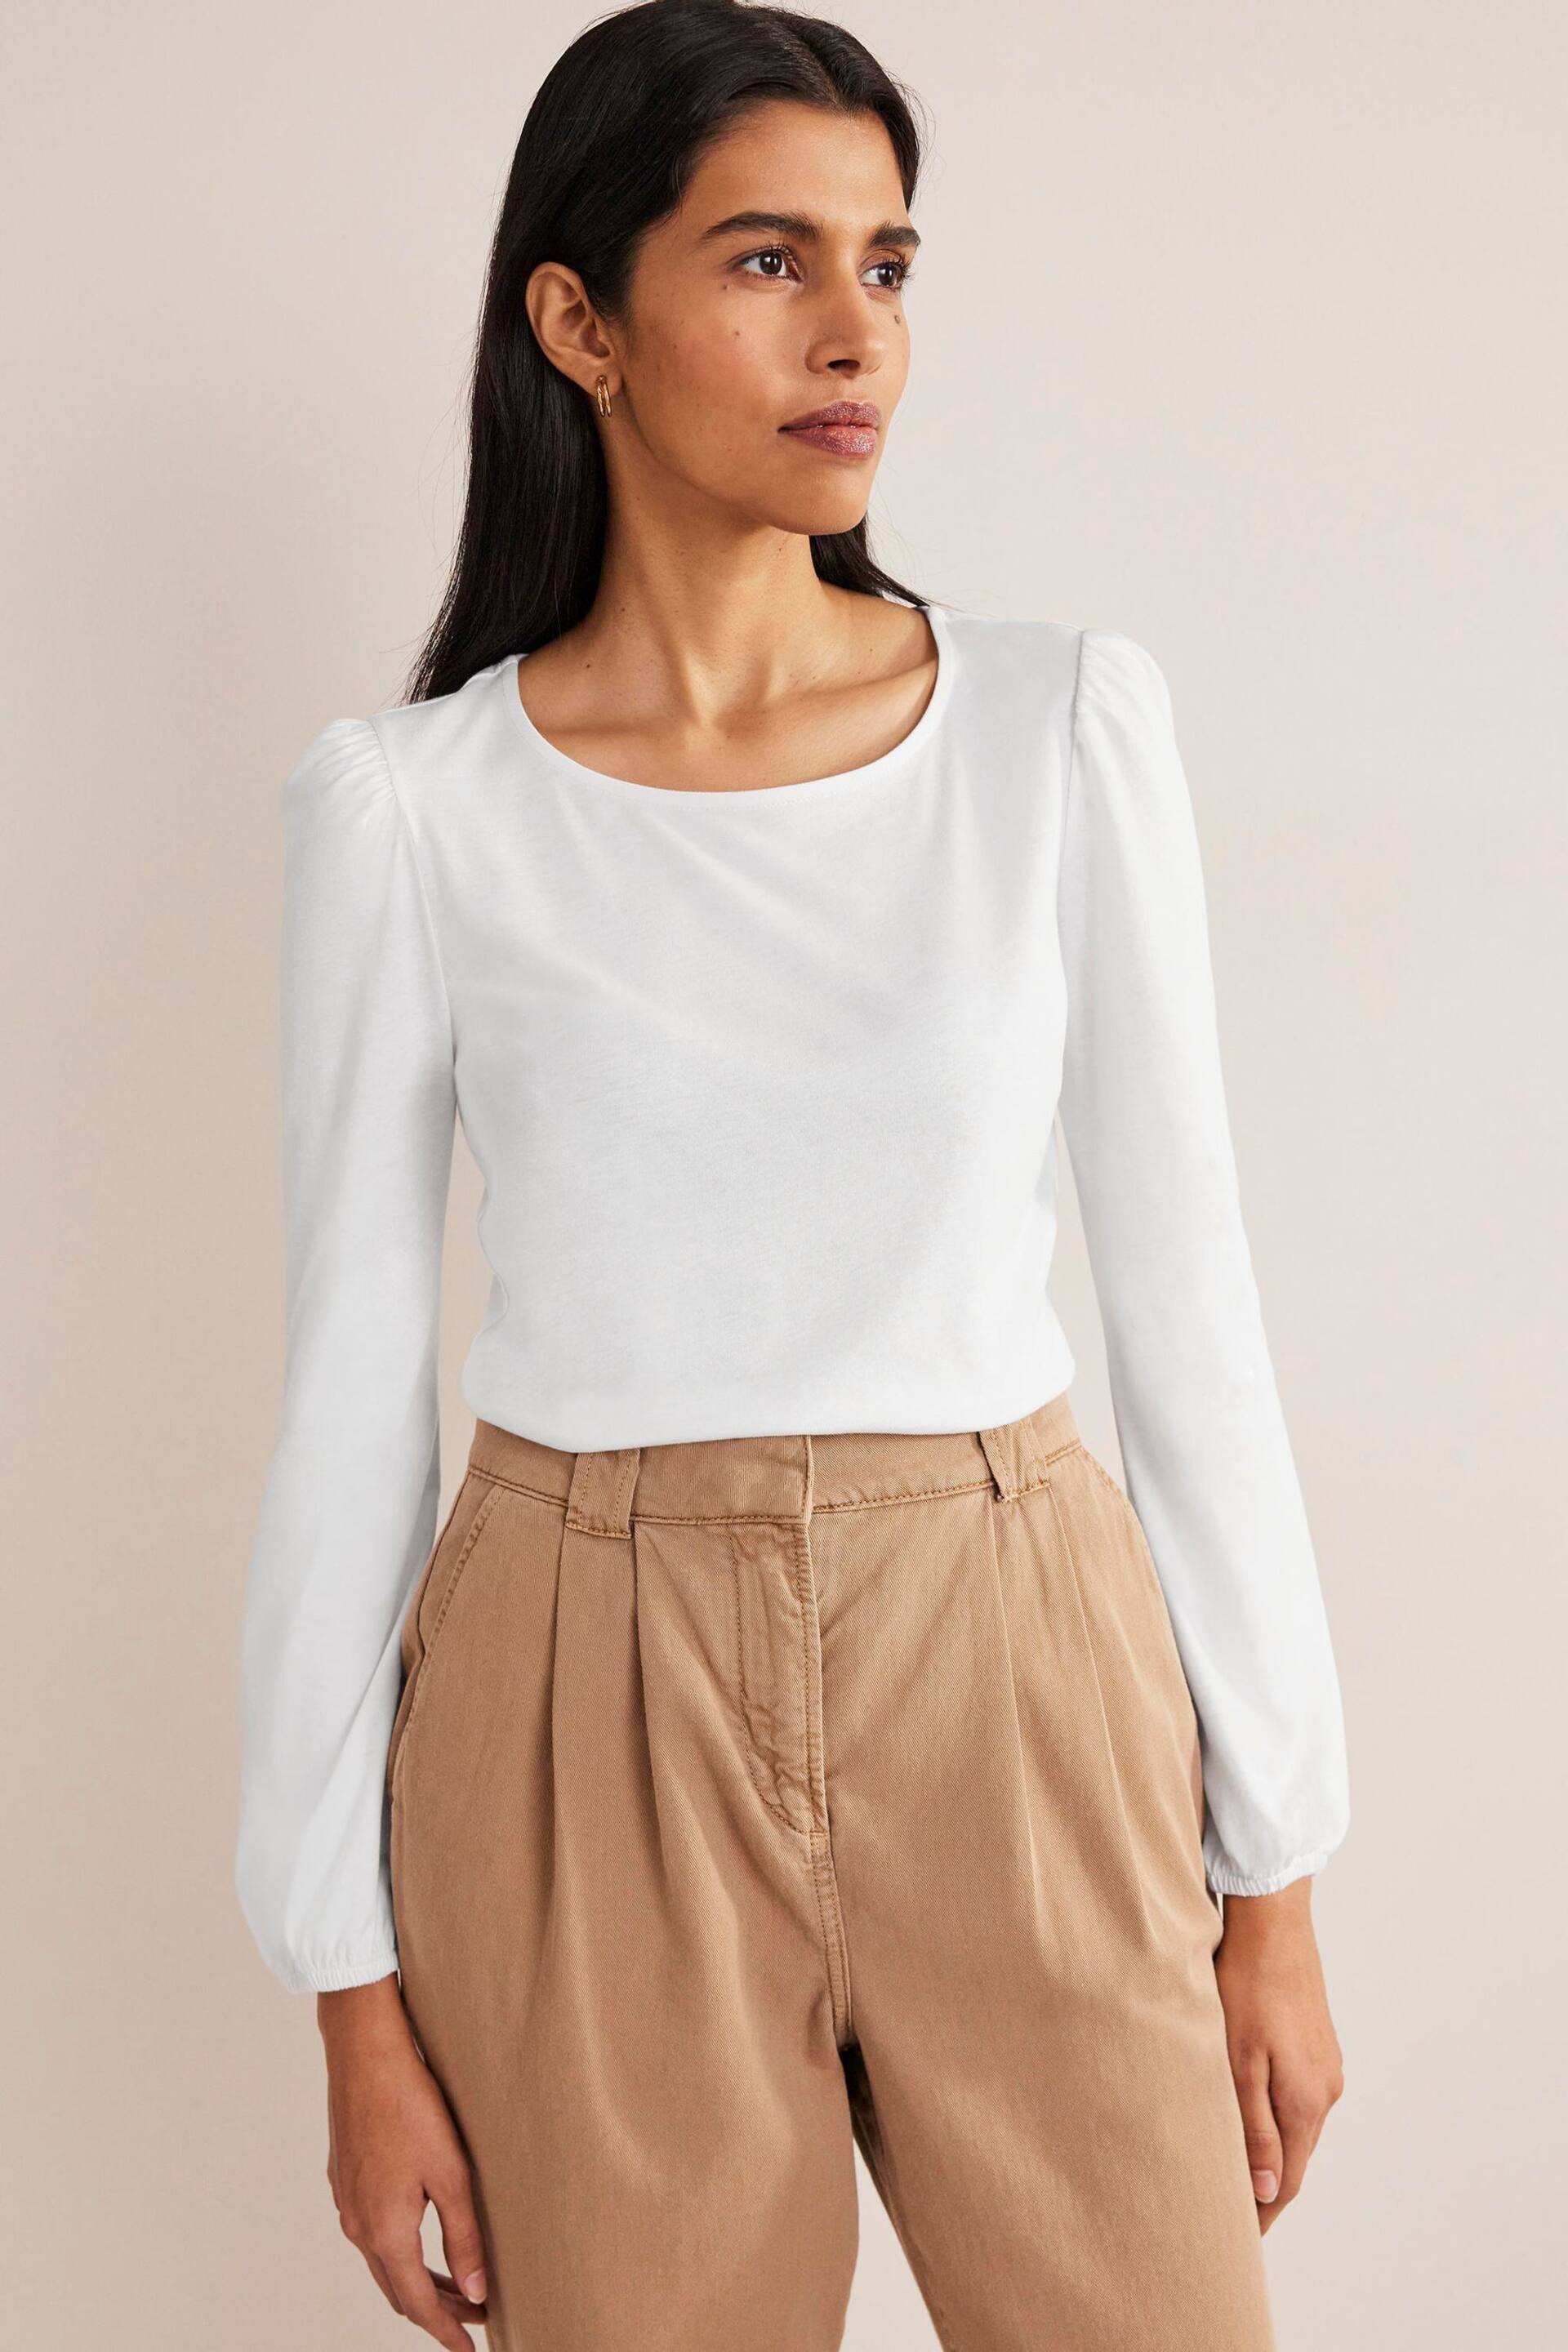 Boden White Supersoft Long Sleeve Top - Image 1 of 5